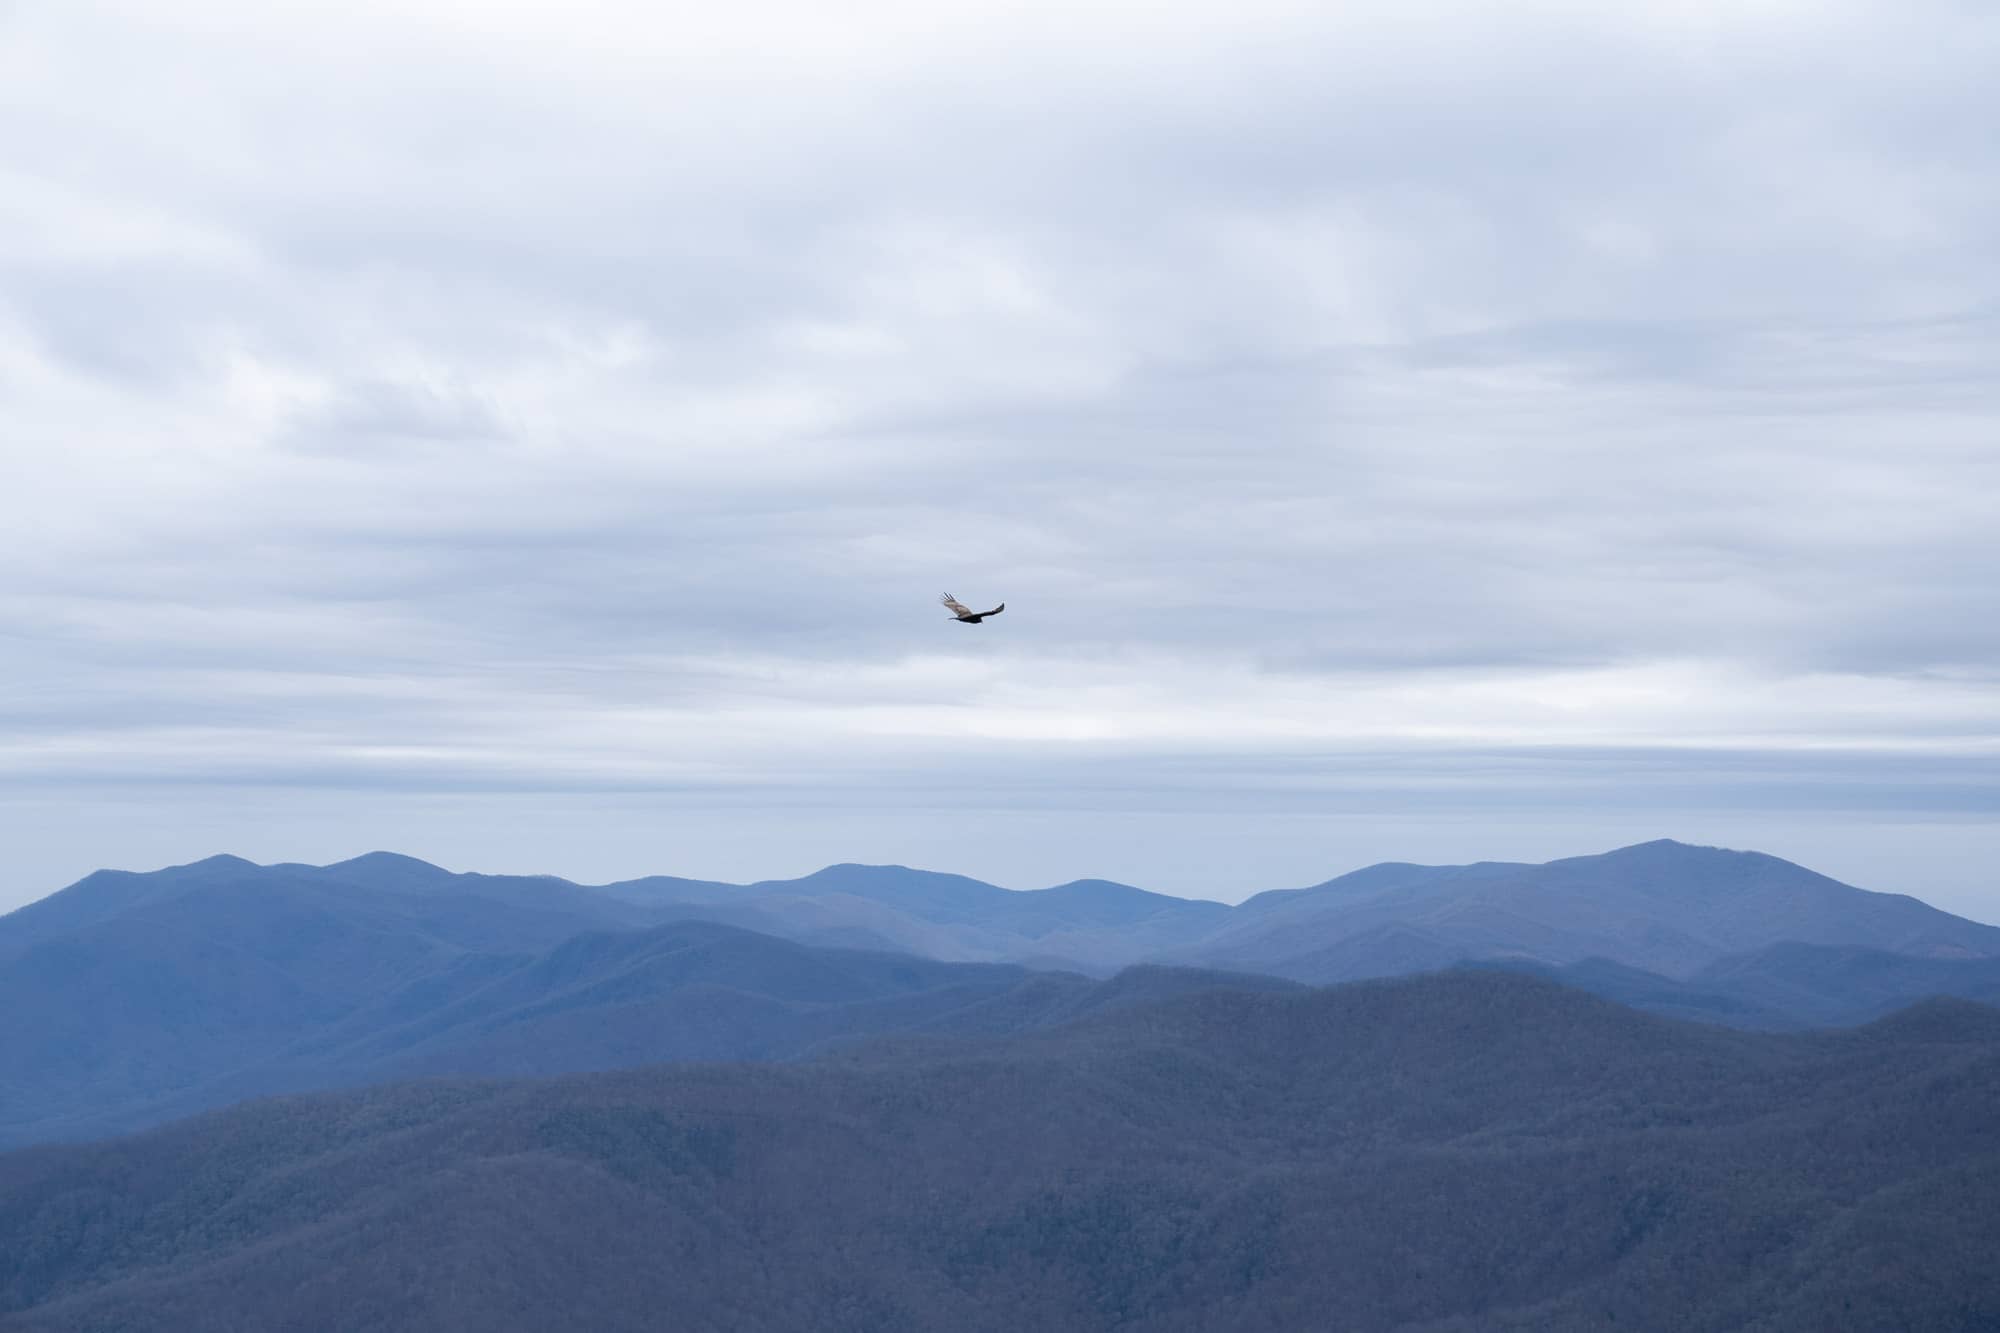 A bird soars across the sky during the fourth day backpacking a section of the Appalachian Trail in the Nantahala National Forest on Tuesday, March 8, 2022, at the Wayah Bald Lookout Tower near Franklin, North Carolina.